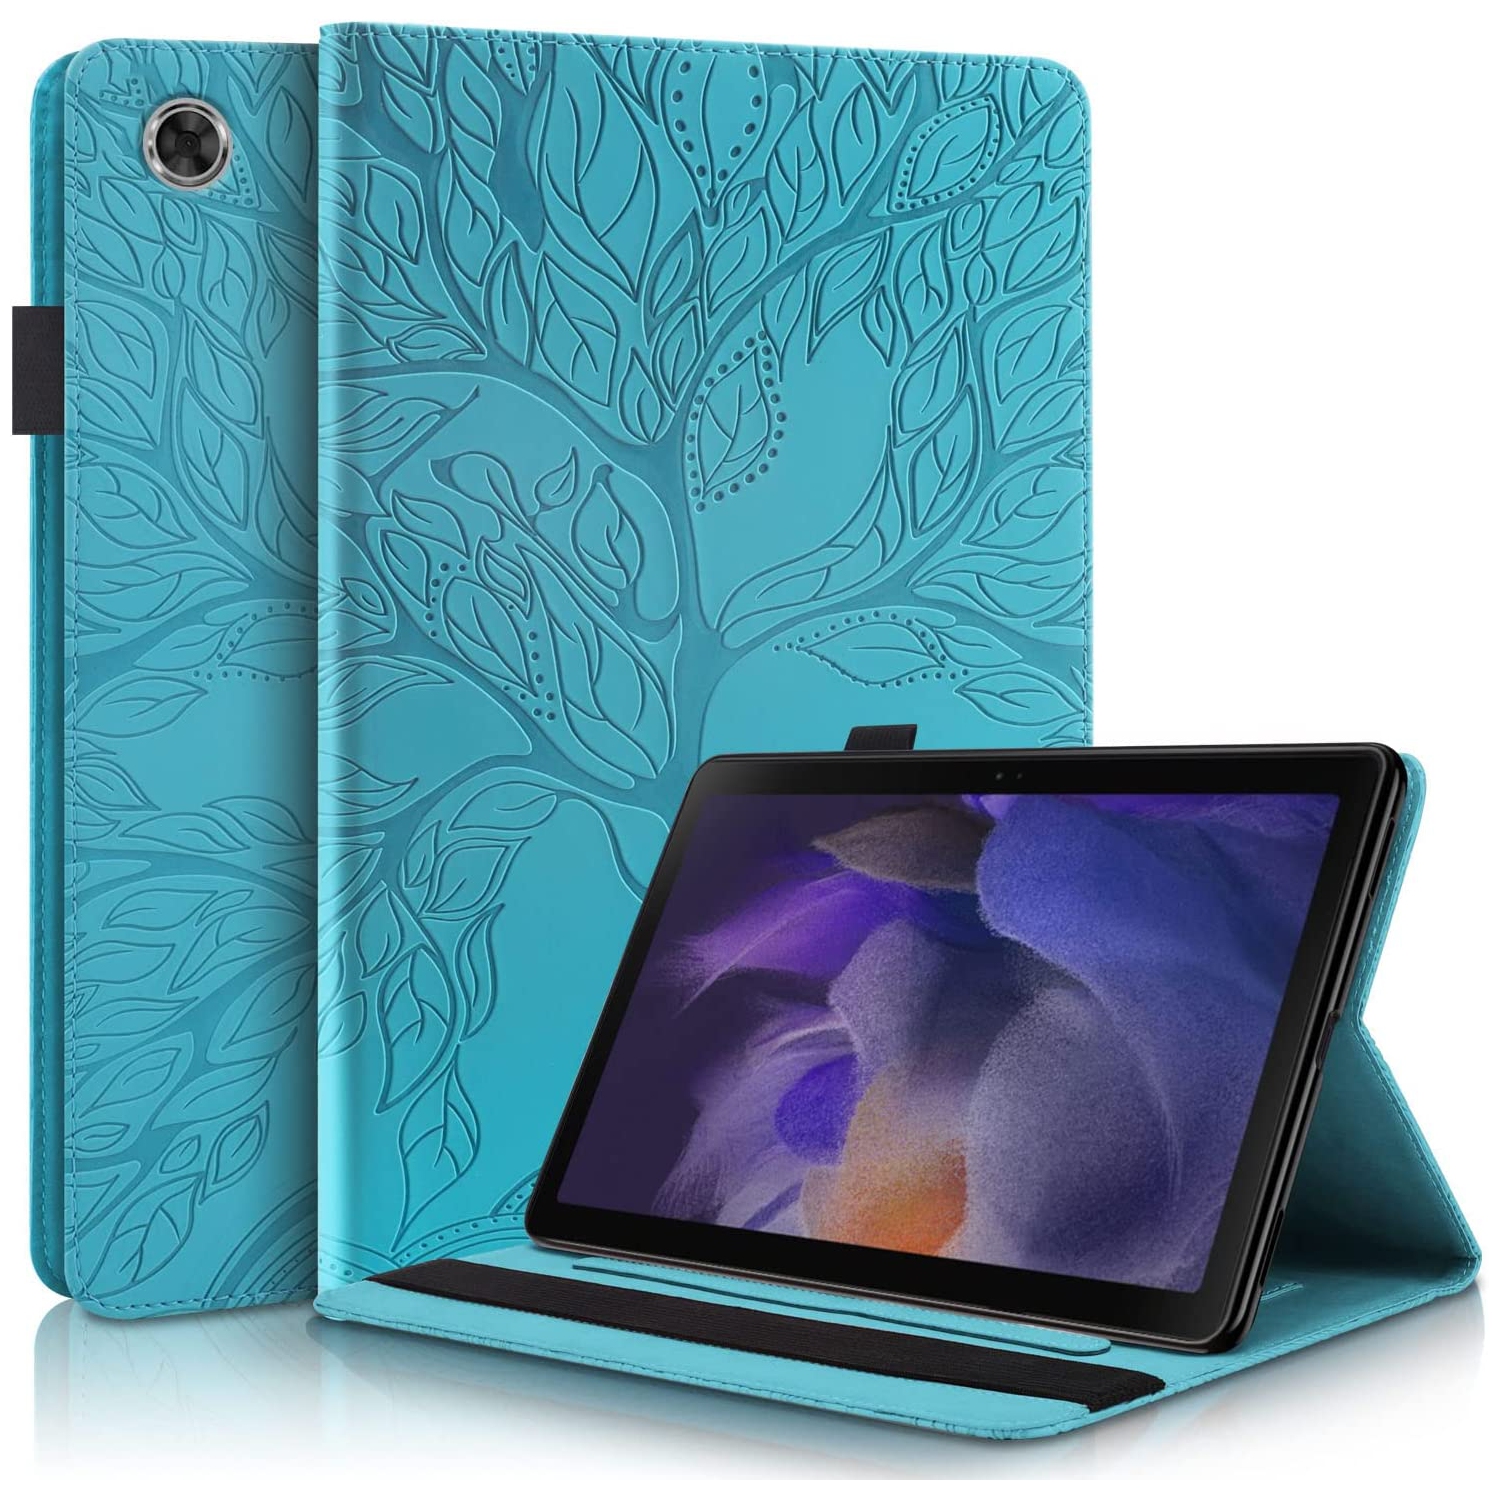 L Case for Samsung Galaxy Tab A8 10.5inch 2021 SM-X200 SM-X205 PU Leather Cover Lightweight Flip Stand Shell Multi-Angle Viewing with Card Holder 10.5 inch,Turquoise inches